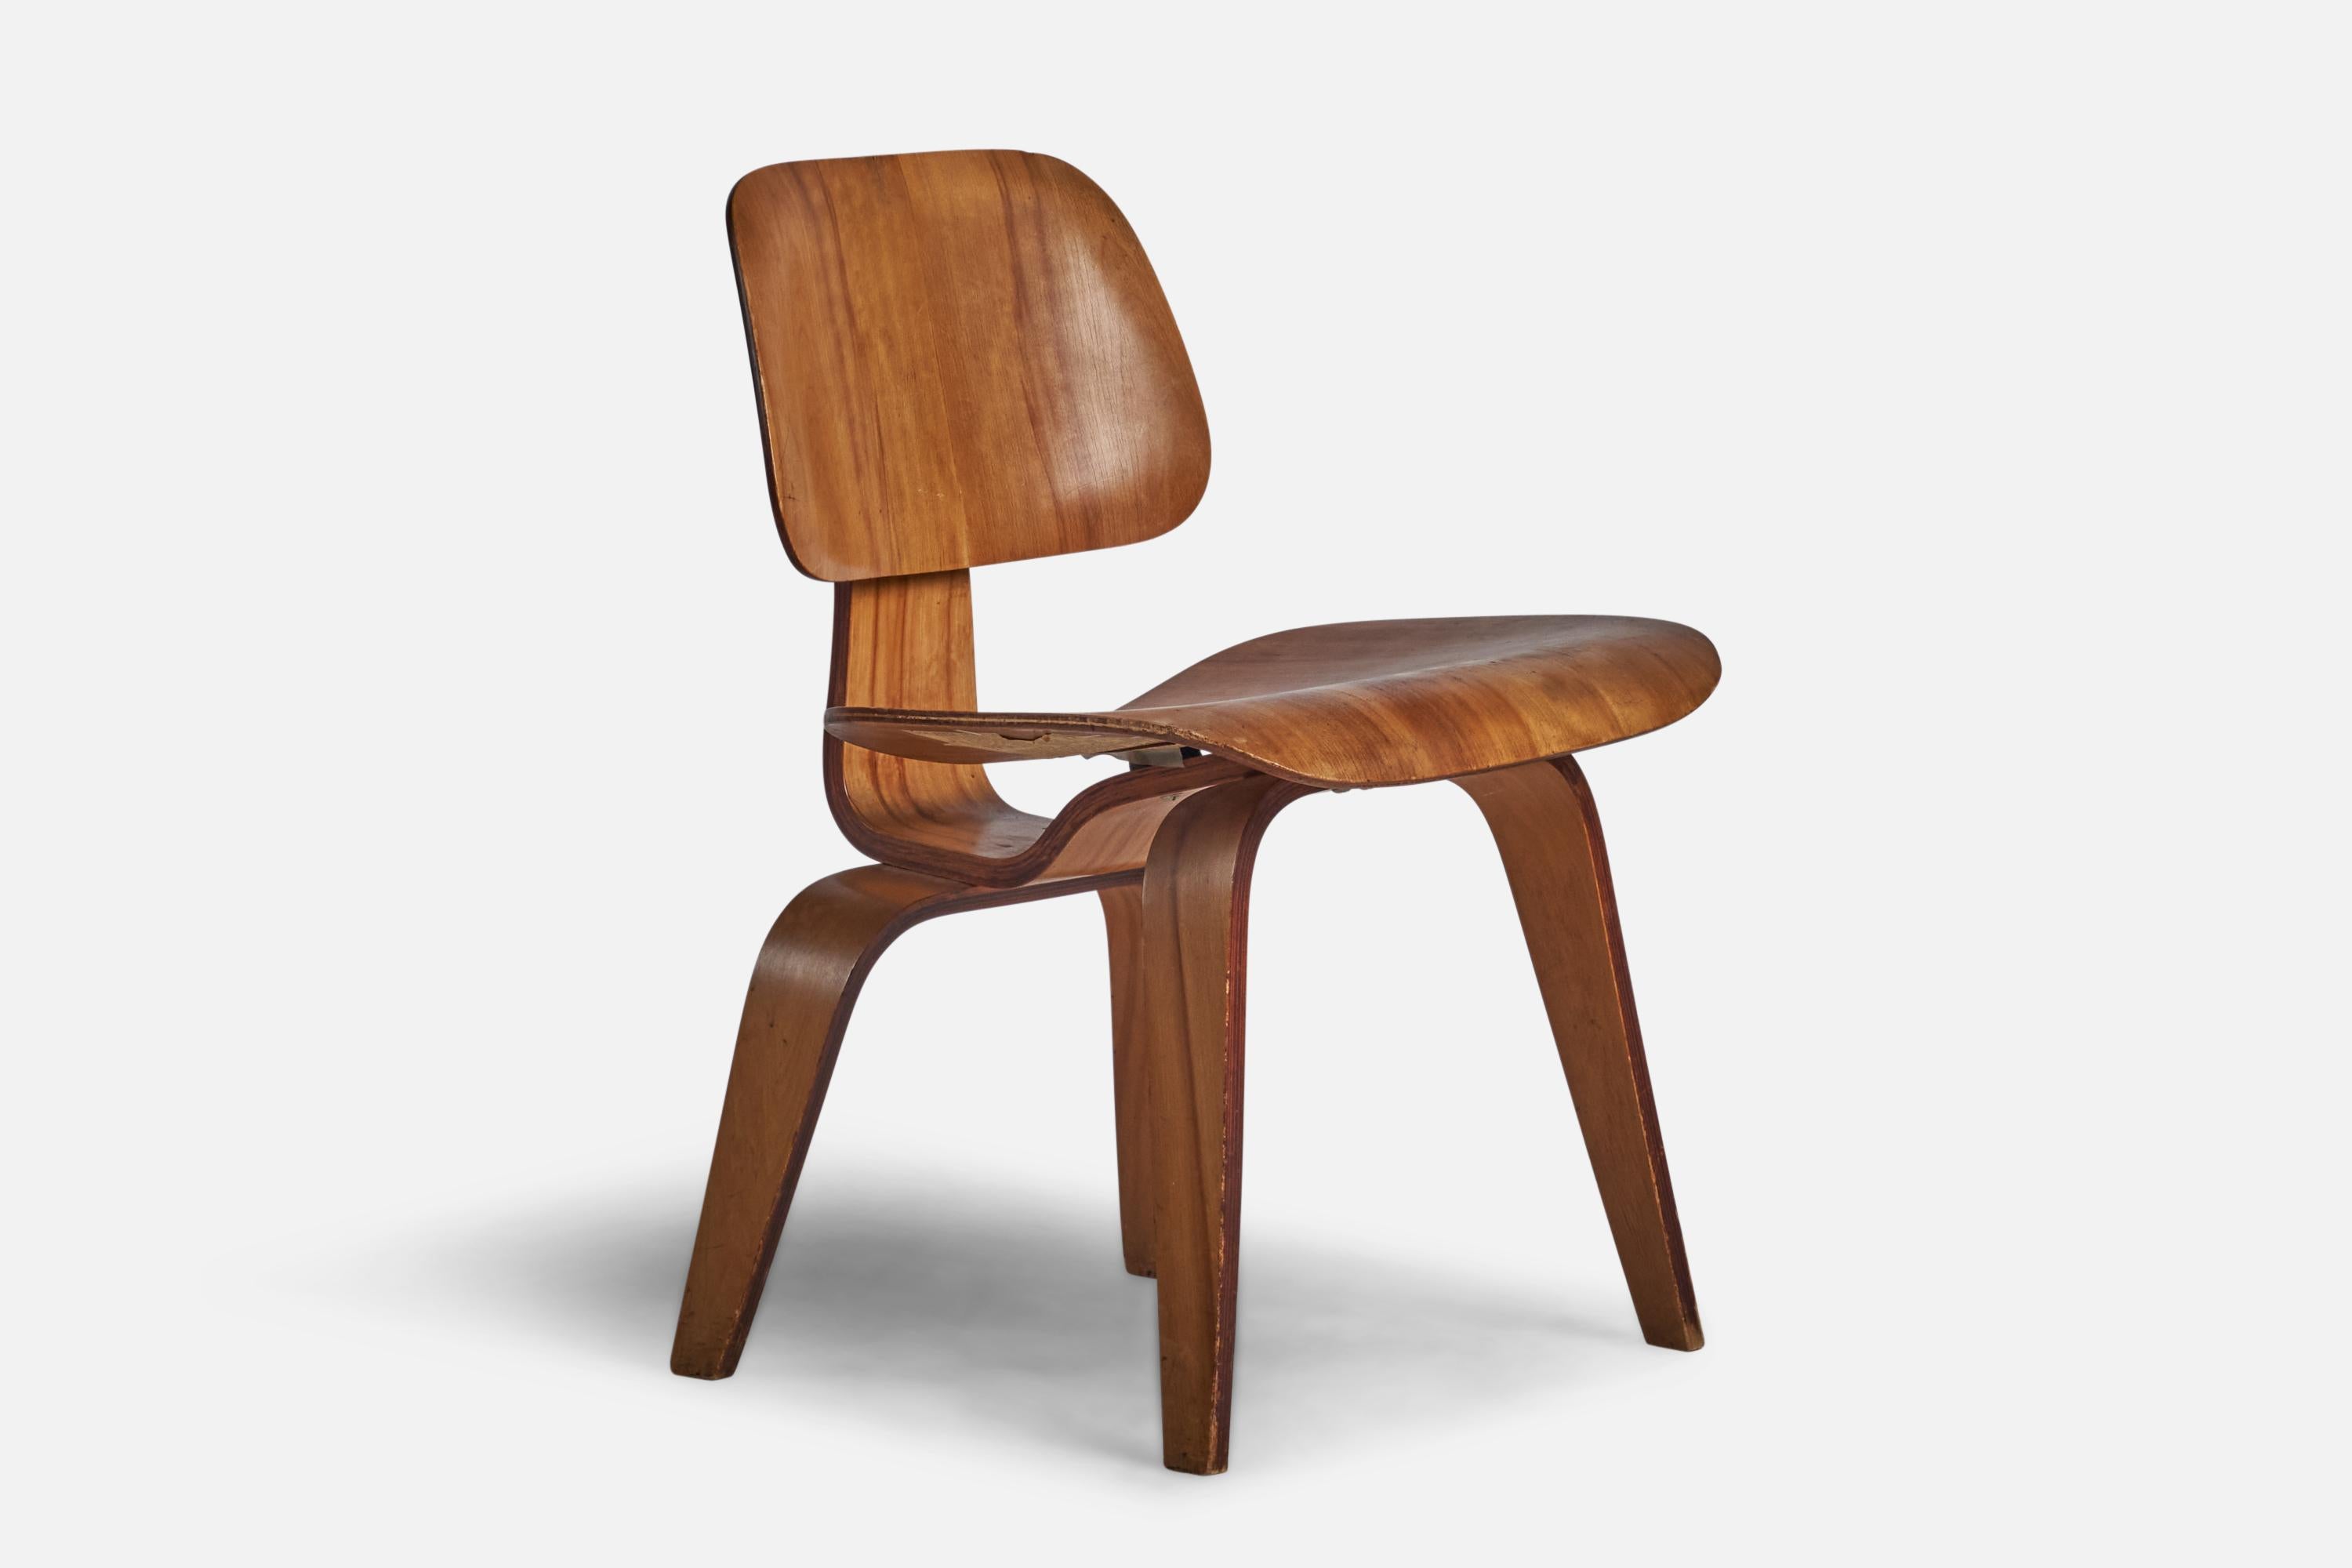 
A moulded plywood DCW dining chair or side chair designed by Charles and Ray Eames and produced by Herman Miller, USA, 1960s.
16.6” seat height